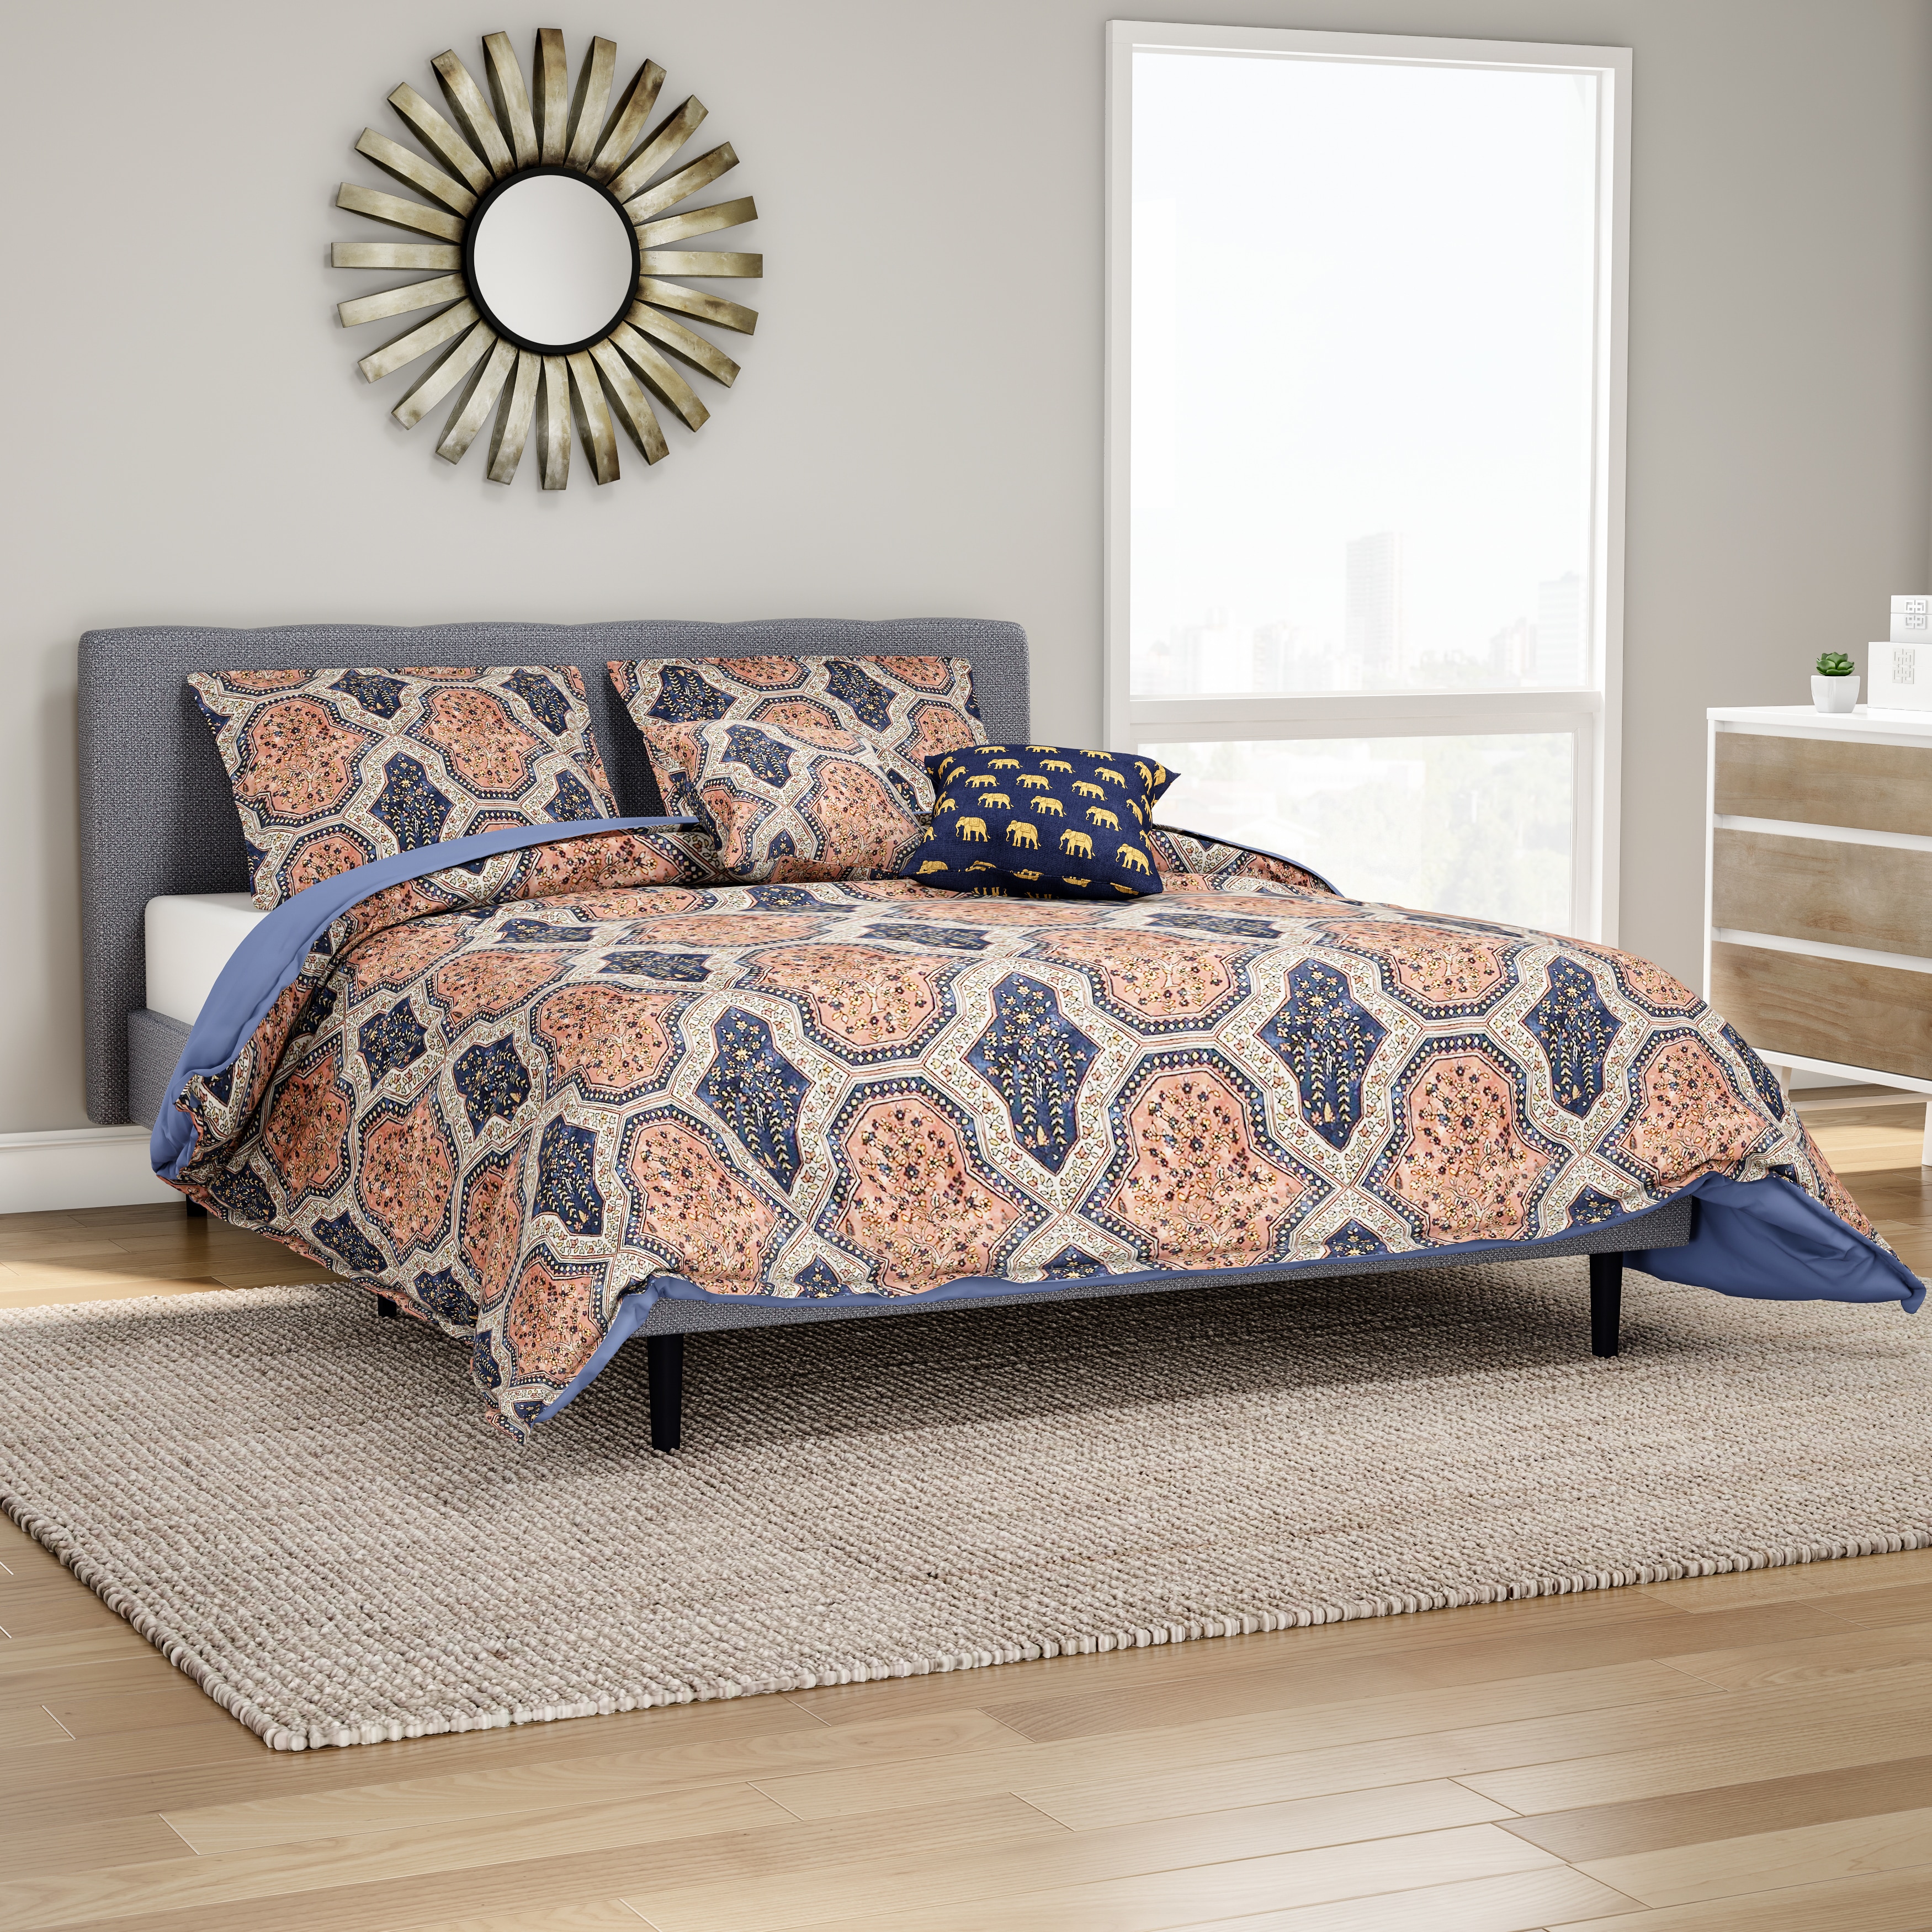 Shop The Curated Nomad Waverly Floral Vine Duvet Cover Set On